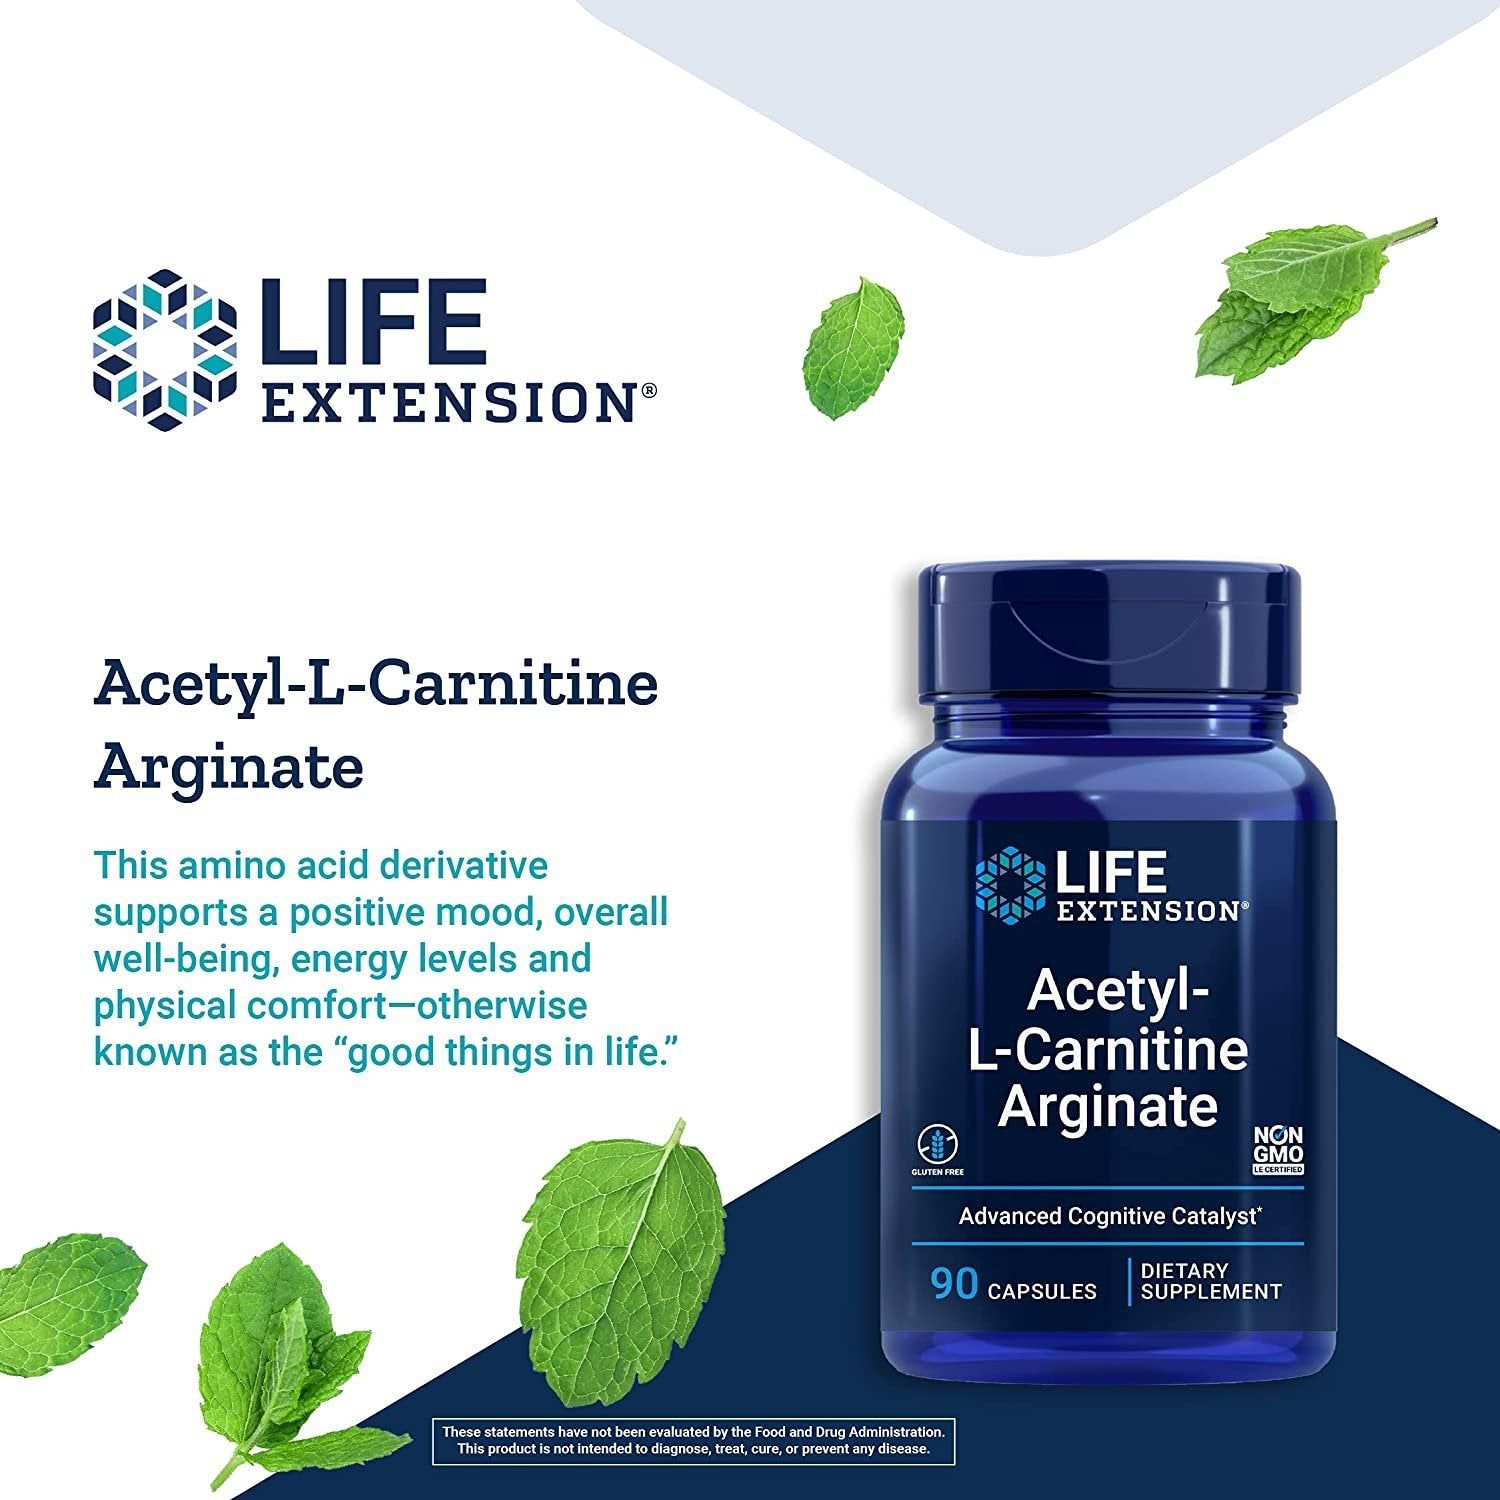 Life Extension Acetyl-L-Carnitine Arginate - Advanced Amino Acid Carnitine Supplement Pills for Memory, Cognition, Cell Energy & Brain Health Support – Gluten-Free, Non-GMO – 90 Capsules